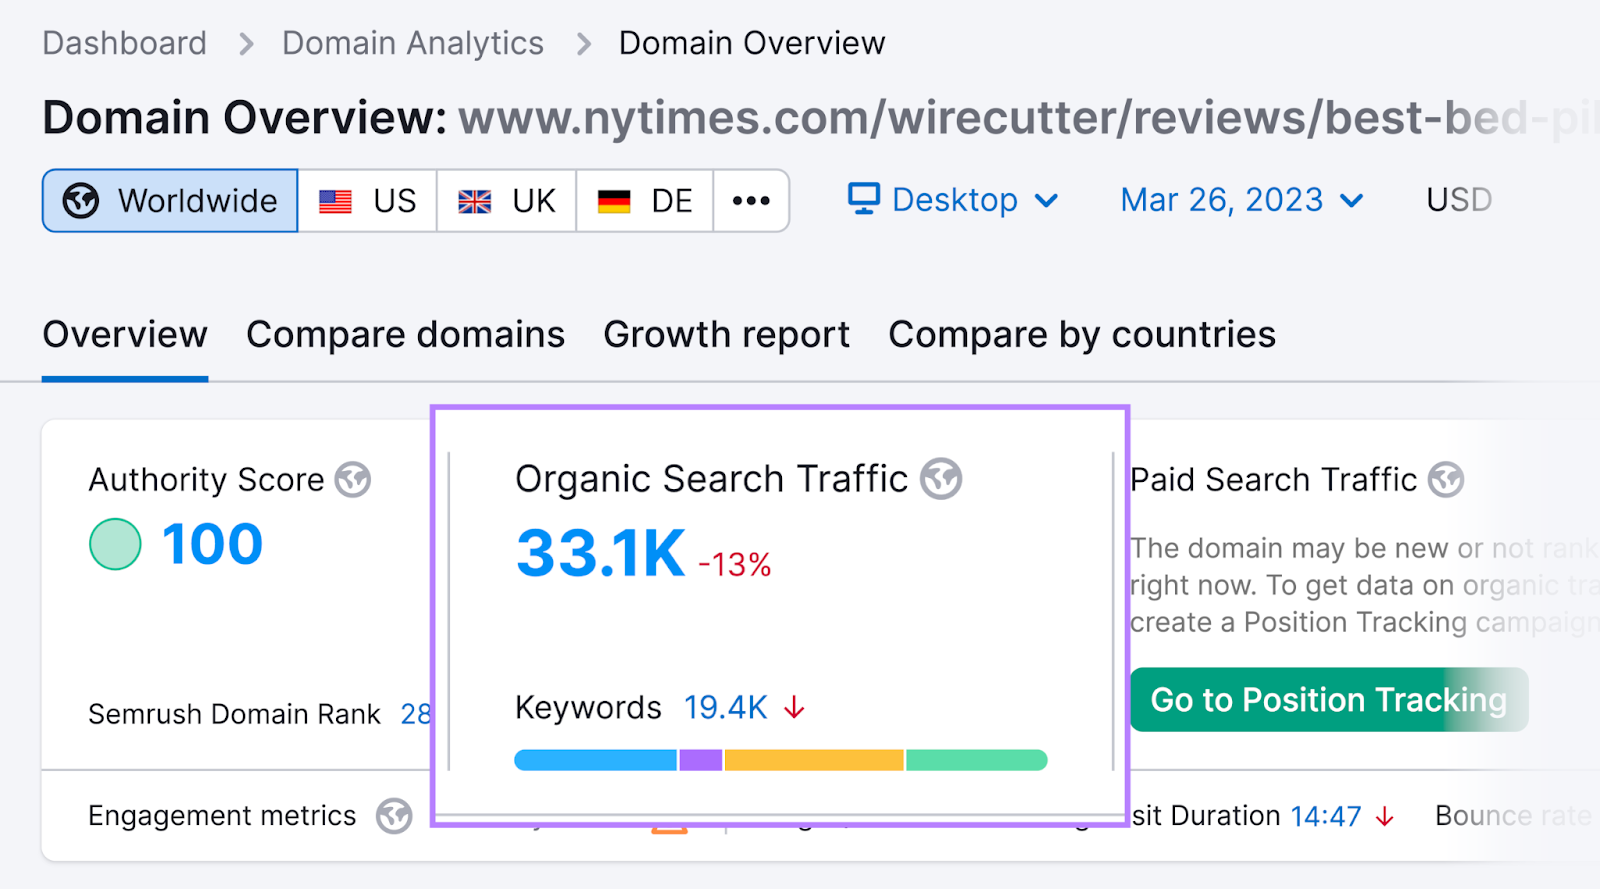 Organic search traffic highlighted